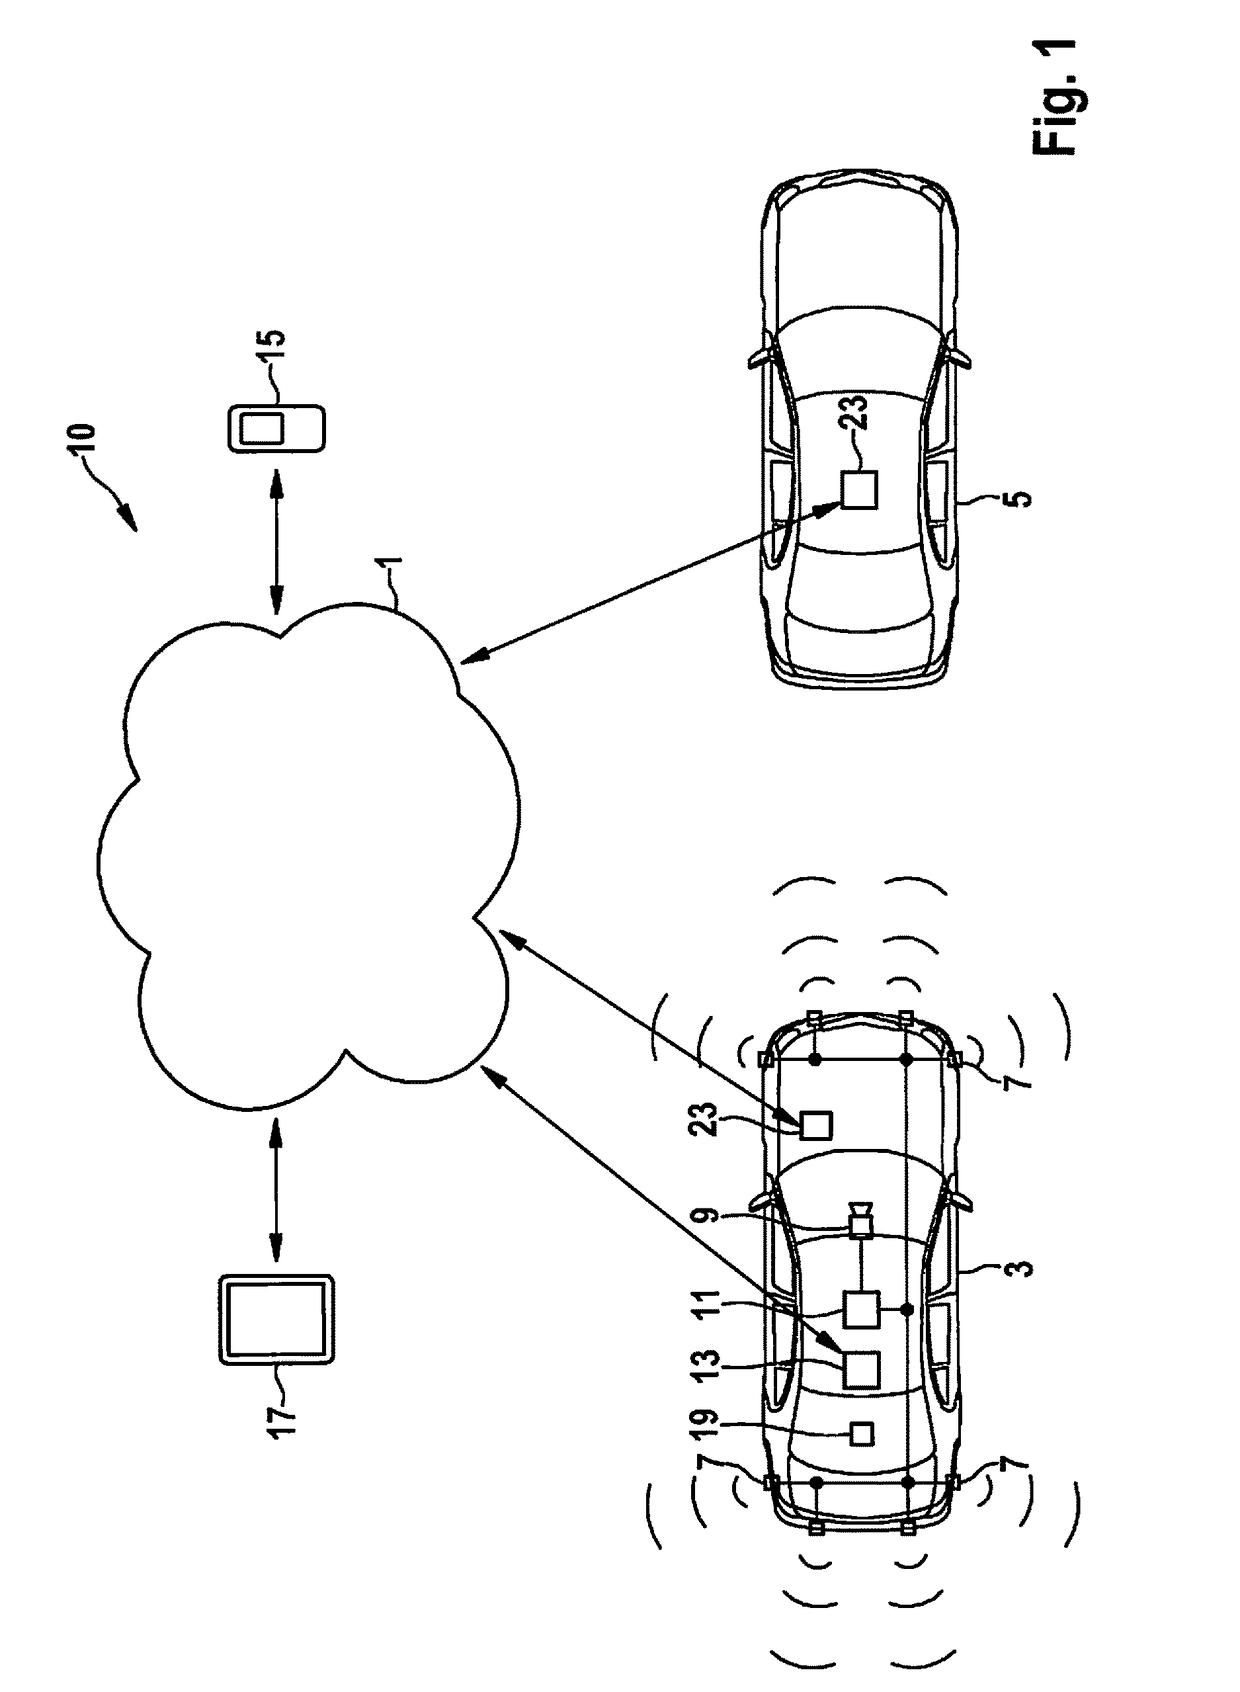 Method for determining parking spaces and free-parking space assistance system